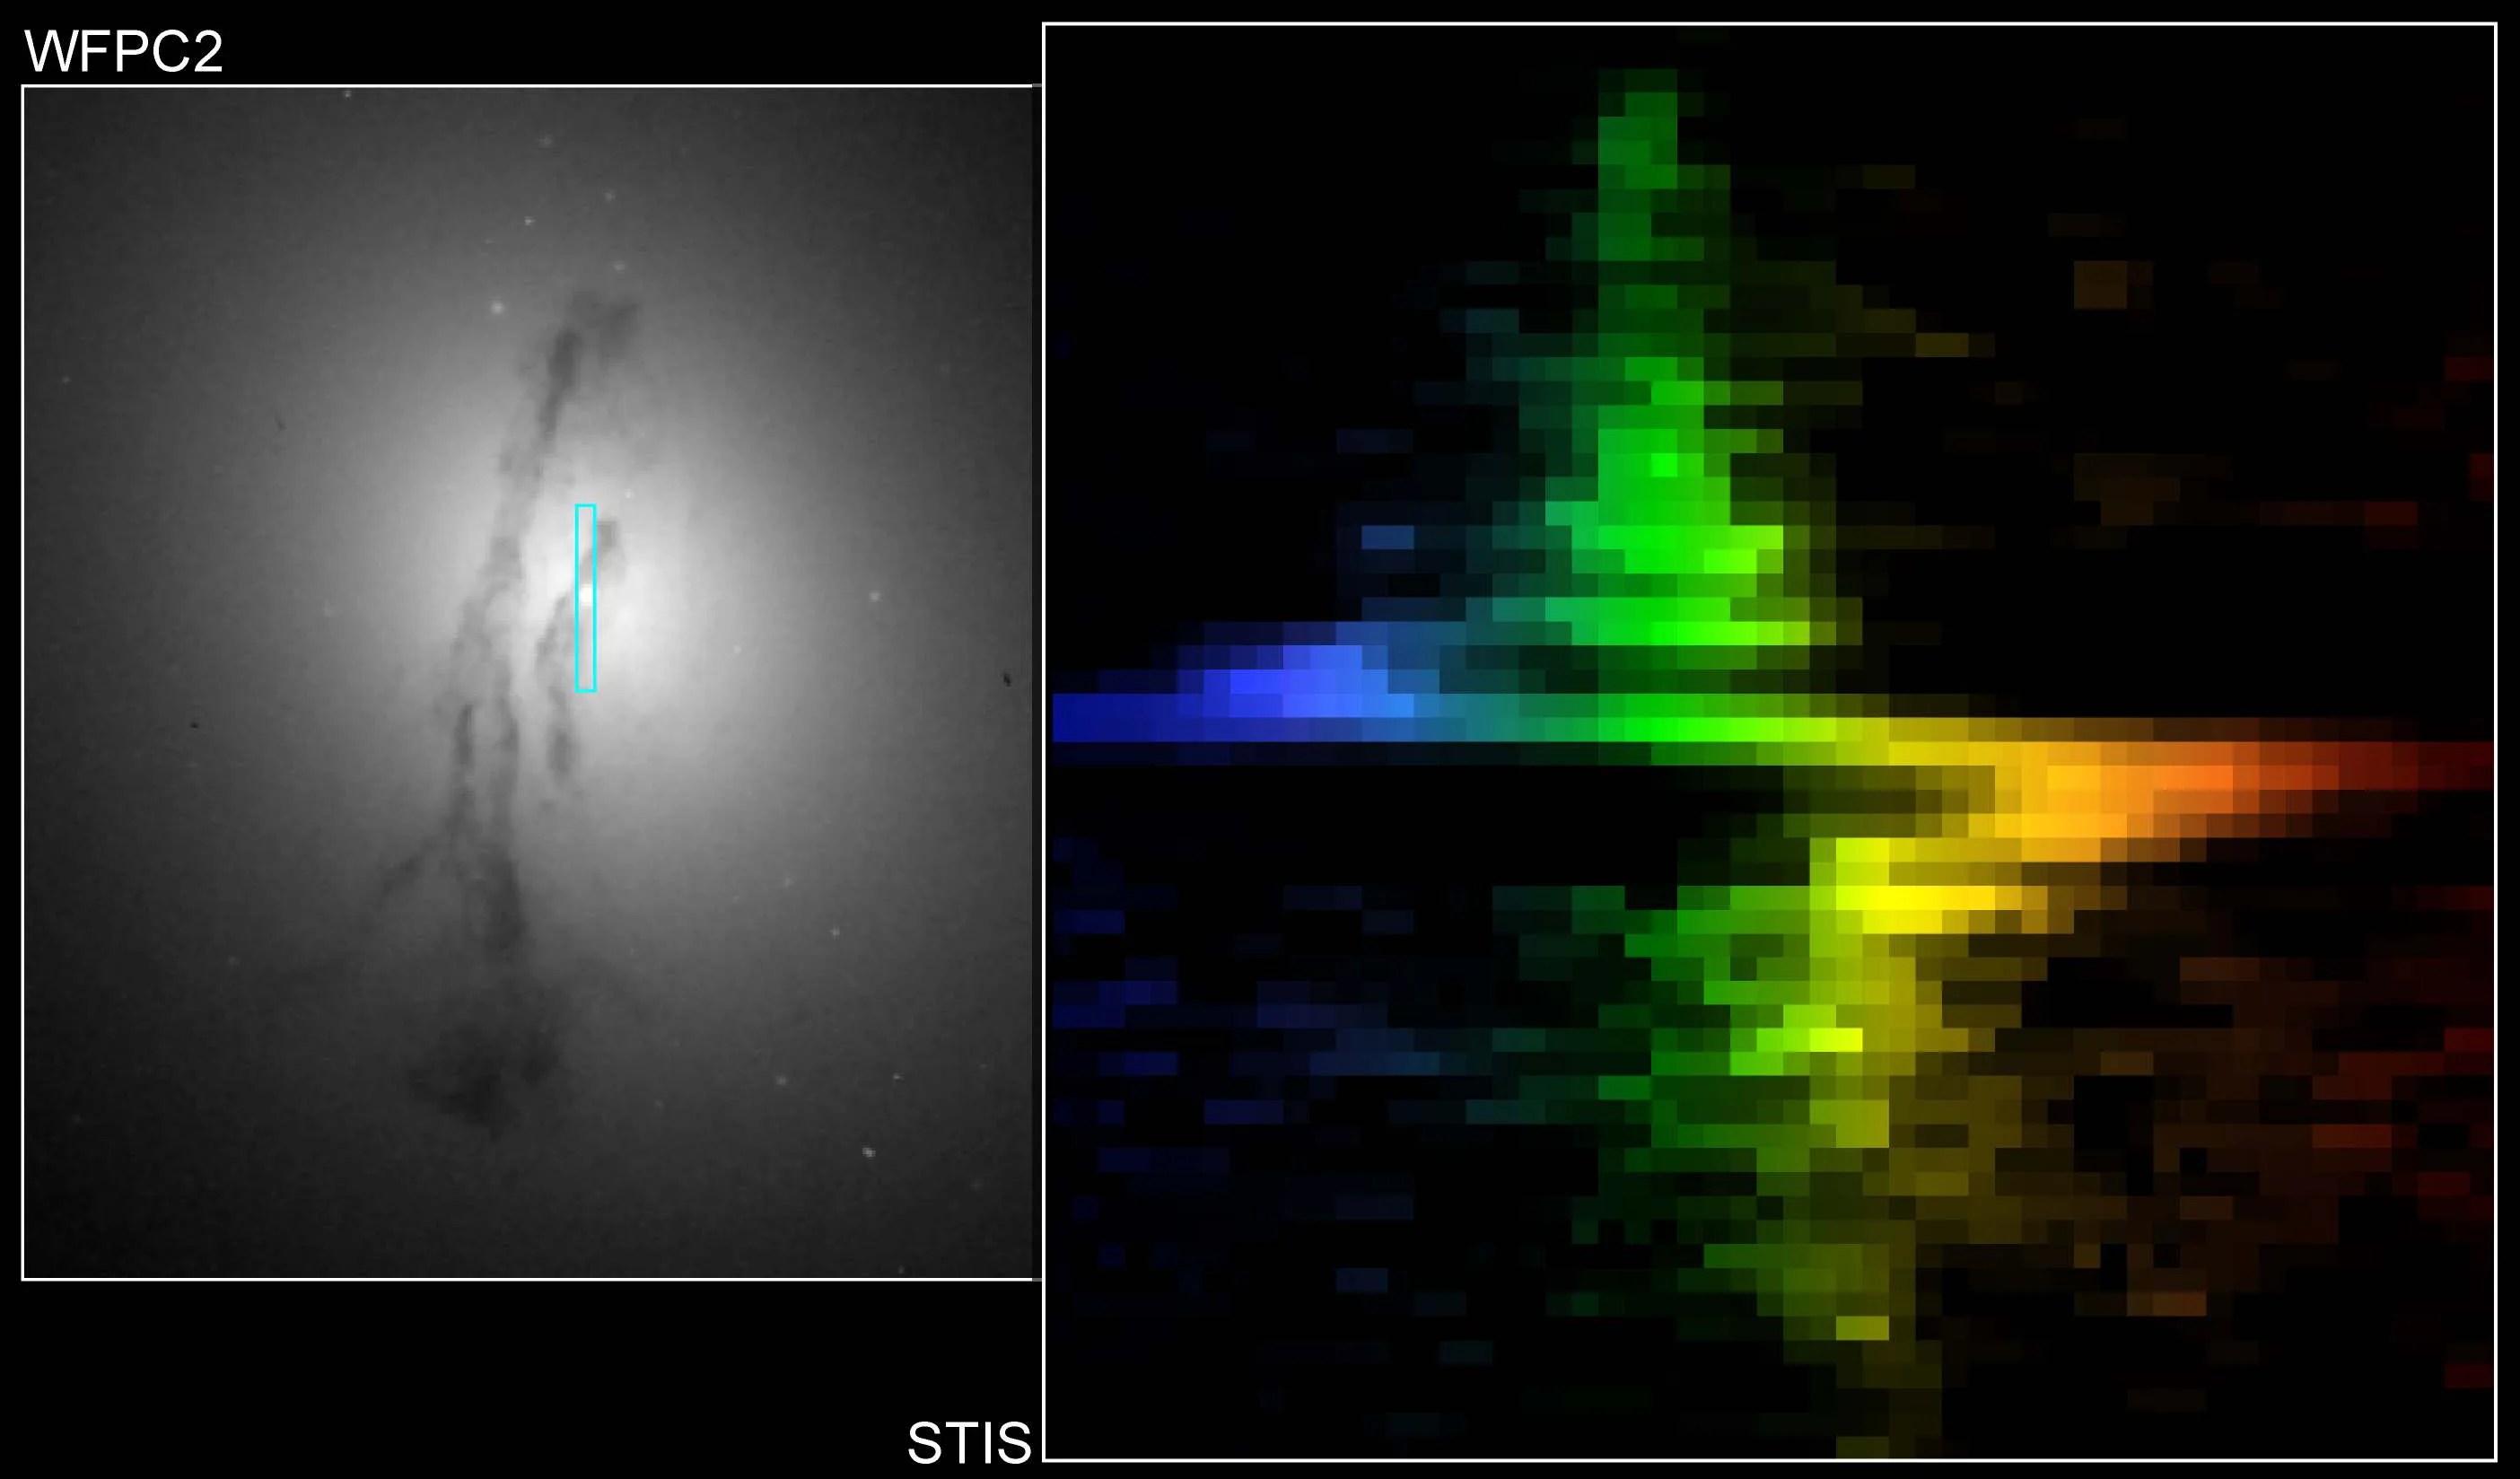 Two images side by side. On the left, the bright galaxy core of M84 glows. On the right, a colorful, jagged line represents a spectrograph plot.